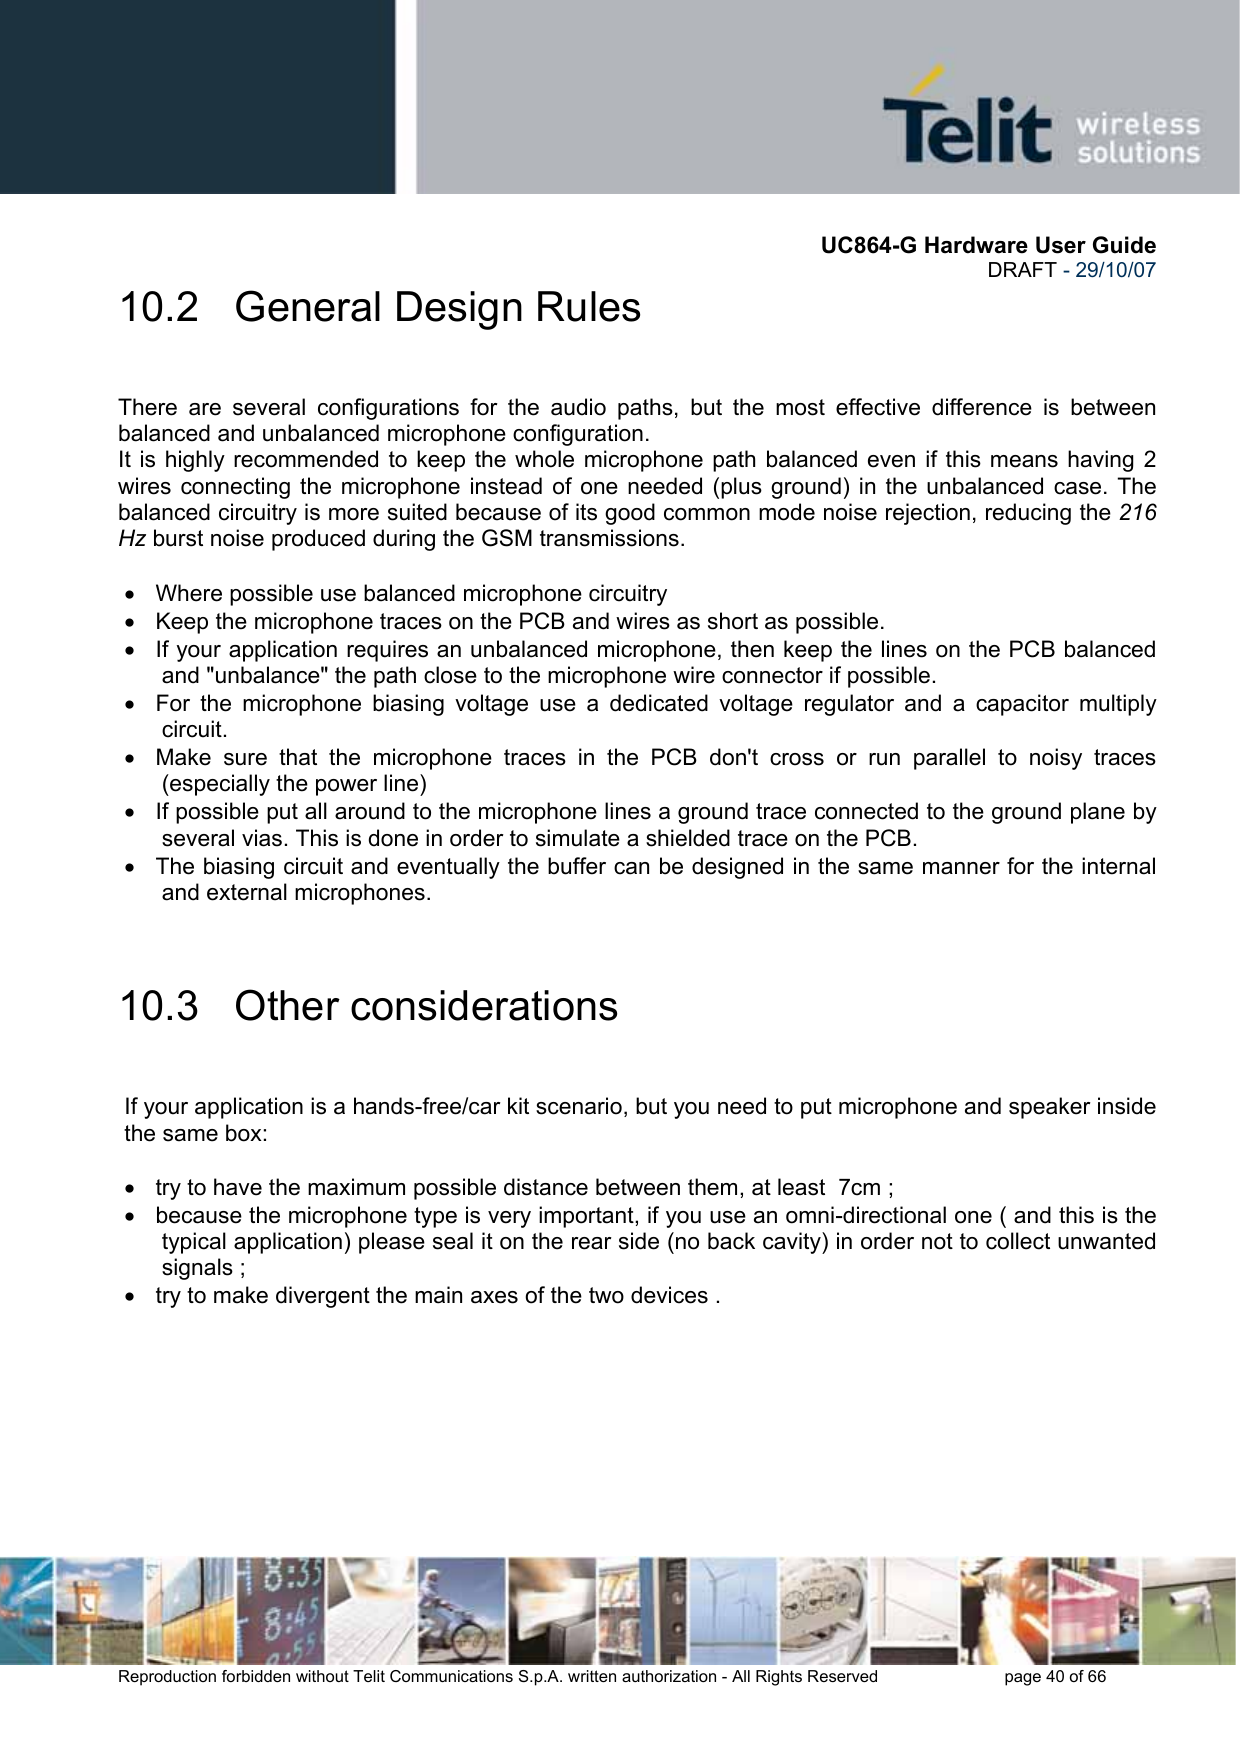       UC864-G Hardware User Guide  DRAFT - 29/10/07      Reproduction forbidden without Telit Communications S.p.A. written authorization - All Rights Reserved    page 40 of 66  10.2   General Design Rules  There are several configurations for the audio paths, but the most effective difference is between balanced and unbalanced microphone configuration. It is highly recommended to keep the whole microphone path balanced even if this means having 2 wires connecting the microphone instead of one needed (plus ground) in the unbalanced case. The balanced circuitry is more suited because of its good common mode noise rejection, reducing the 216 Hz burst noise produced during the GSM transmissions.  •  Where possible use balanced microphone circuitry •  Keep the microphone traces on the PCB and wires as short as possible. •  If your application requires an unbalanced microphone, then keep the lines on the PCB balanced and &quot;unbalance&quot; the path close to the microphone wire connector if possible. •  For the microphone biasing voltage use a dedicated voltage regulator and a capacitor multiply circuit. •  Make sure that the microphone traces in the PCB don&apos;t cross or run parallel to noisy traces (especially the power line)  •  If possible put all around to the microphone lines a ground trace connected to the ground plane by several vias. This is done in order to simulate a shielded trace on the PCB. •  The biasing circuit and eventually the buffer can be designed in the same manner for the internal and external microphones.  10.3   Other considerations  If your application is a hands-free/car kit scenario, but you need to put microphone and speaker inside the same box:  •  try to have the maximum possible distance between them, at least  7cm ; •  because the microphone type is very important, if you use an omni-directional one ( and this is the typical application) please seal it on the rear side (no back cavity) in order not to collect unwanted signals ; •  try to make divergent the main axes of the two devices .  